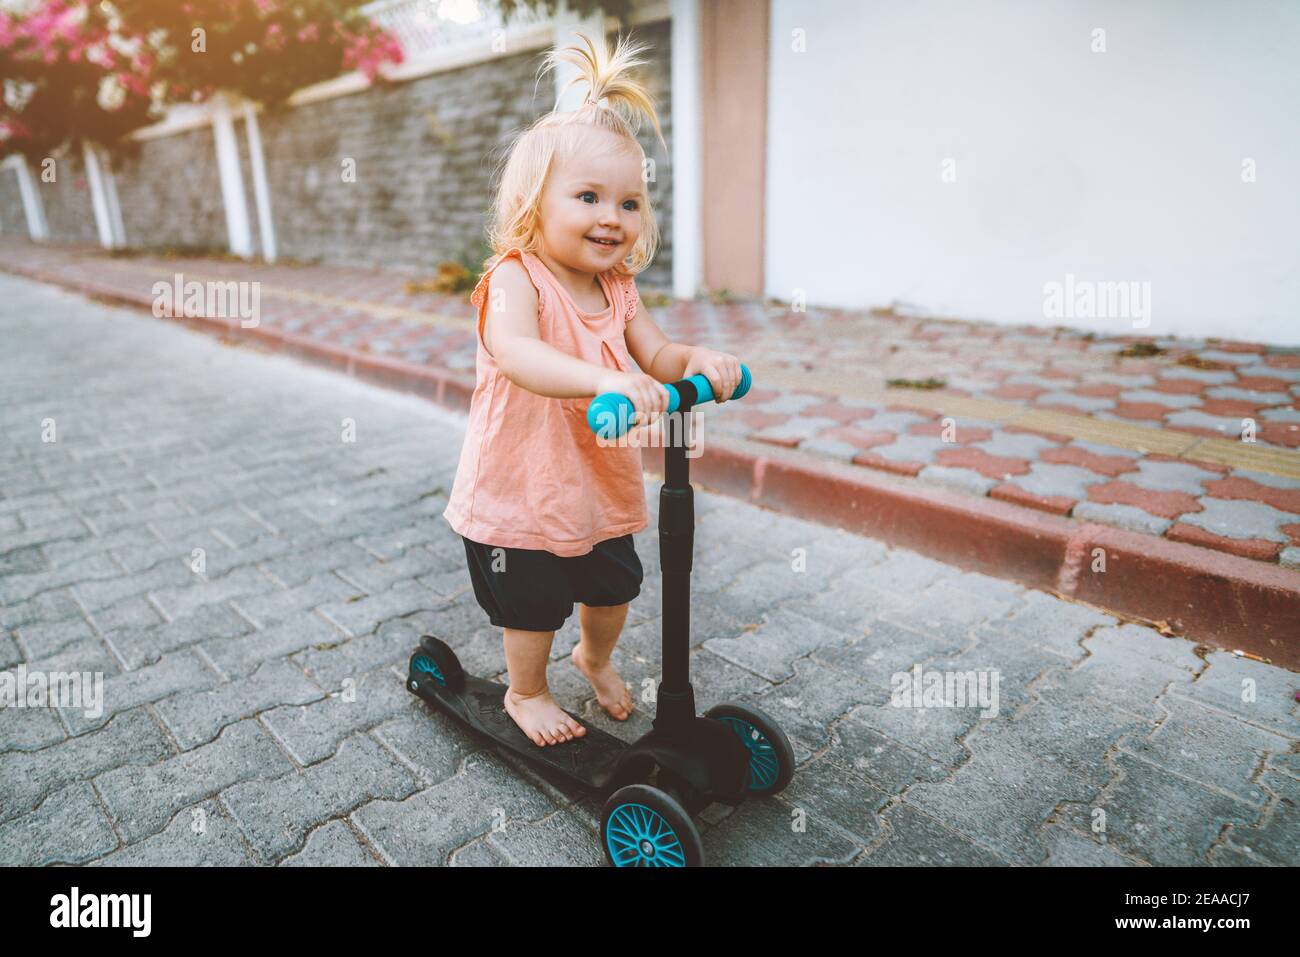 Baby girl riding scooter in city happy child 1 year old healthy lifestyle family fun activity outdoor Stock Photo